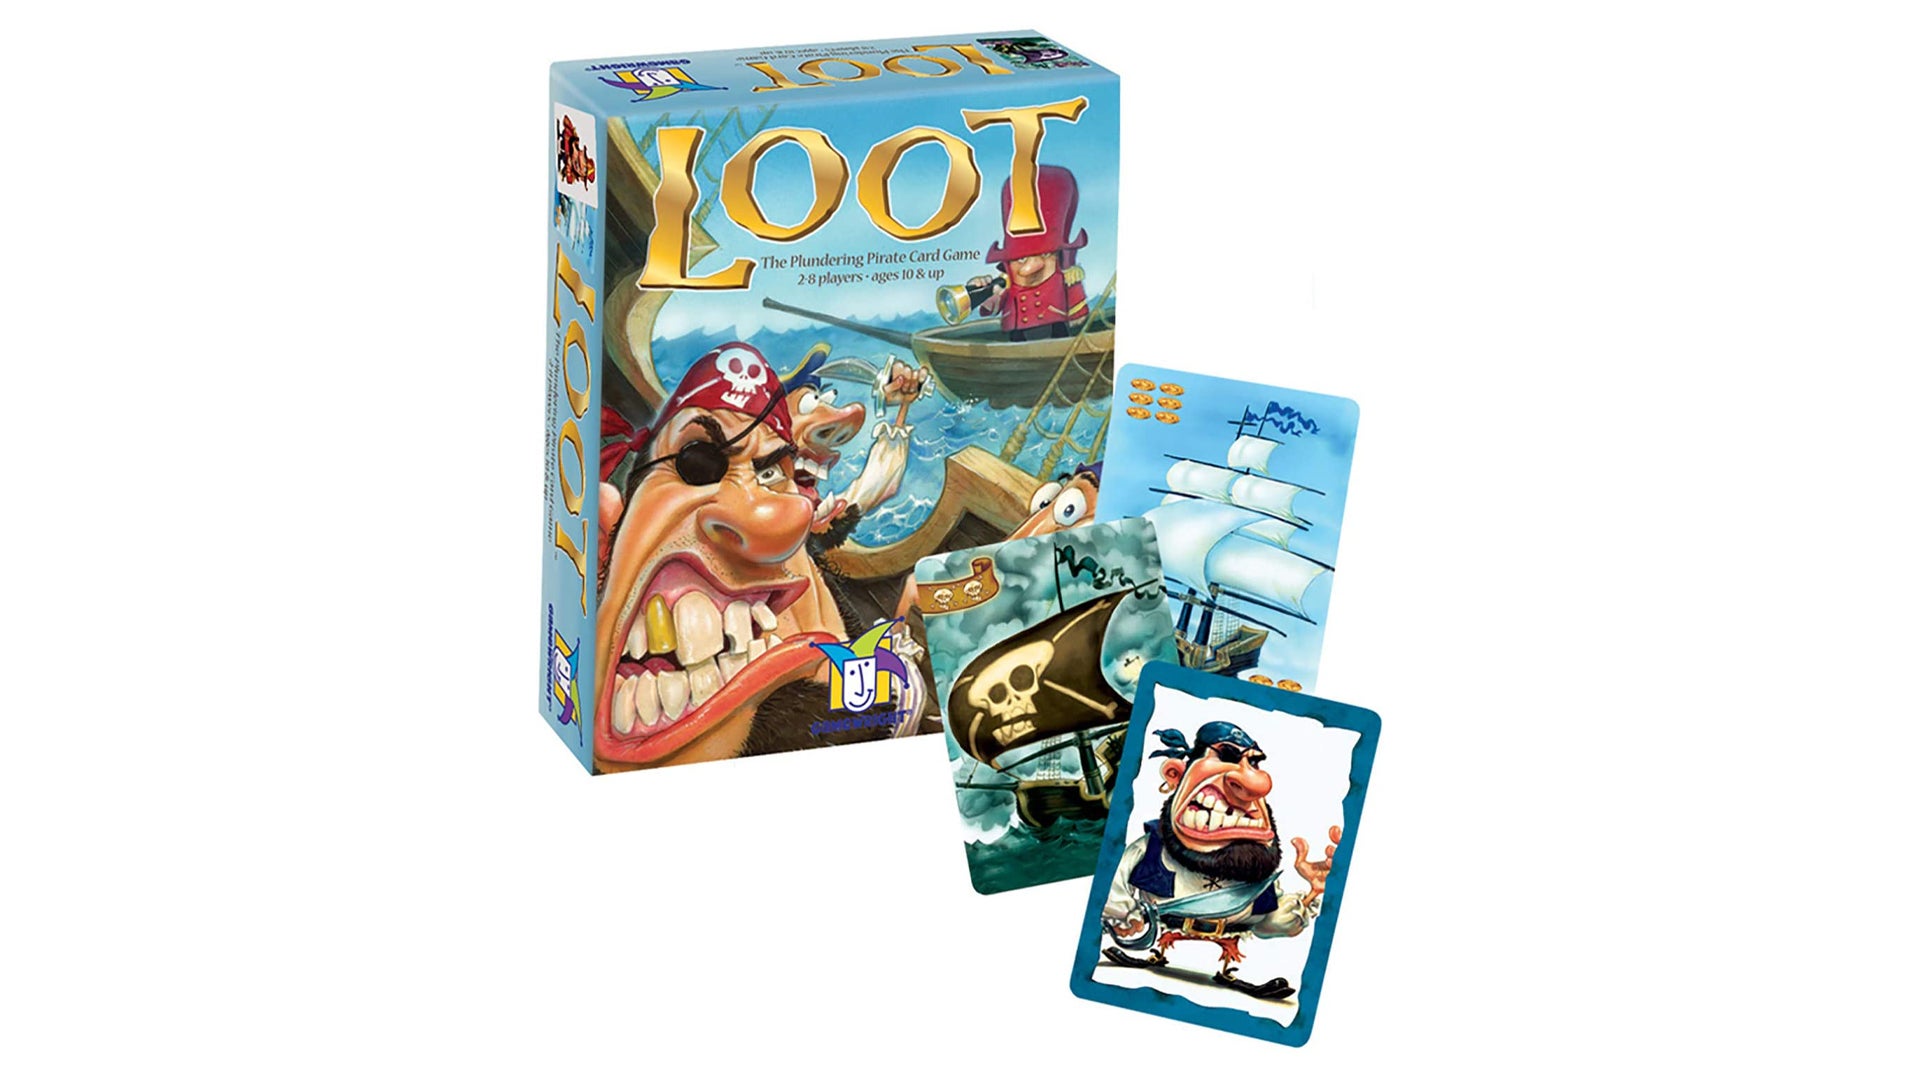 An image of the box for the Loot board game.